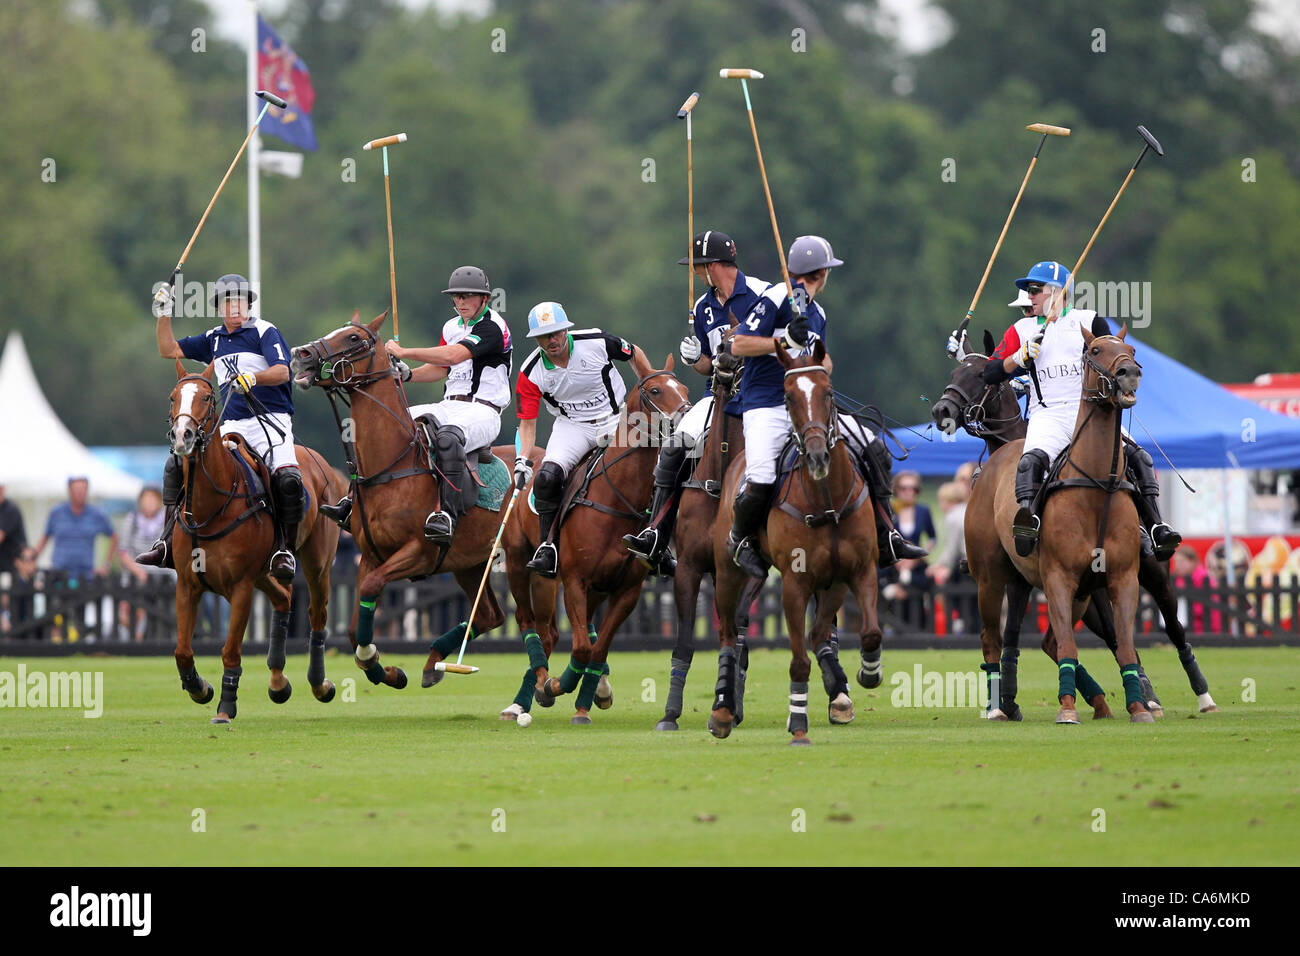 17.06.2012. Guards Polo Club, Windsor, Berkshire, England.  Adolfo Cambiaso from Dubai Team at The Cartier Queen's Cup Final 2012 - Guards Polo Club Stock Photo